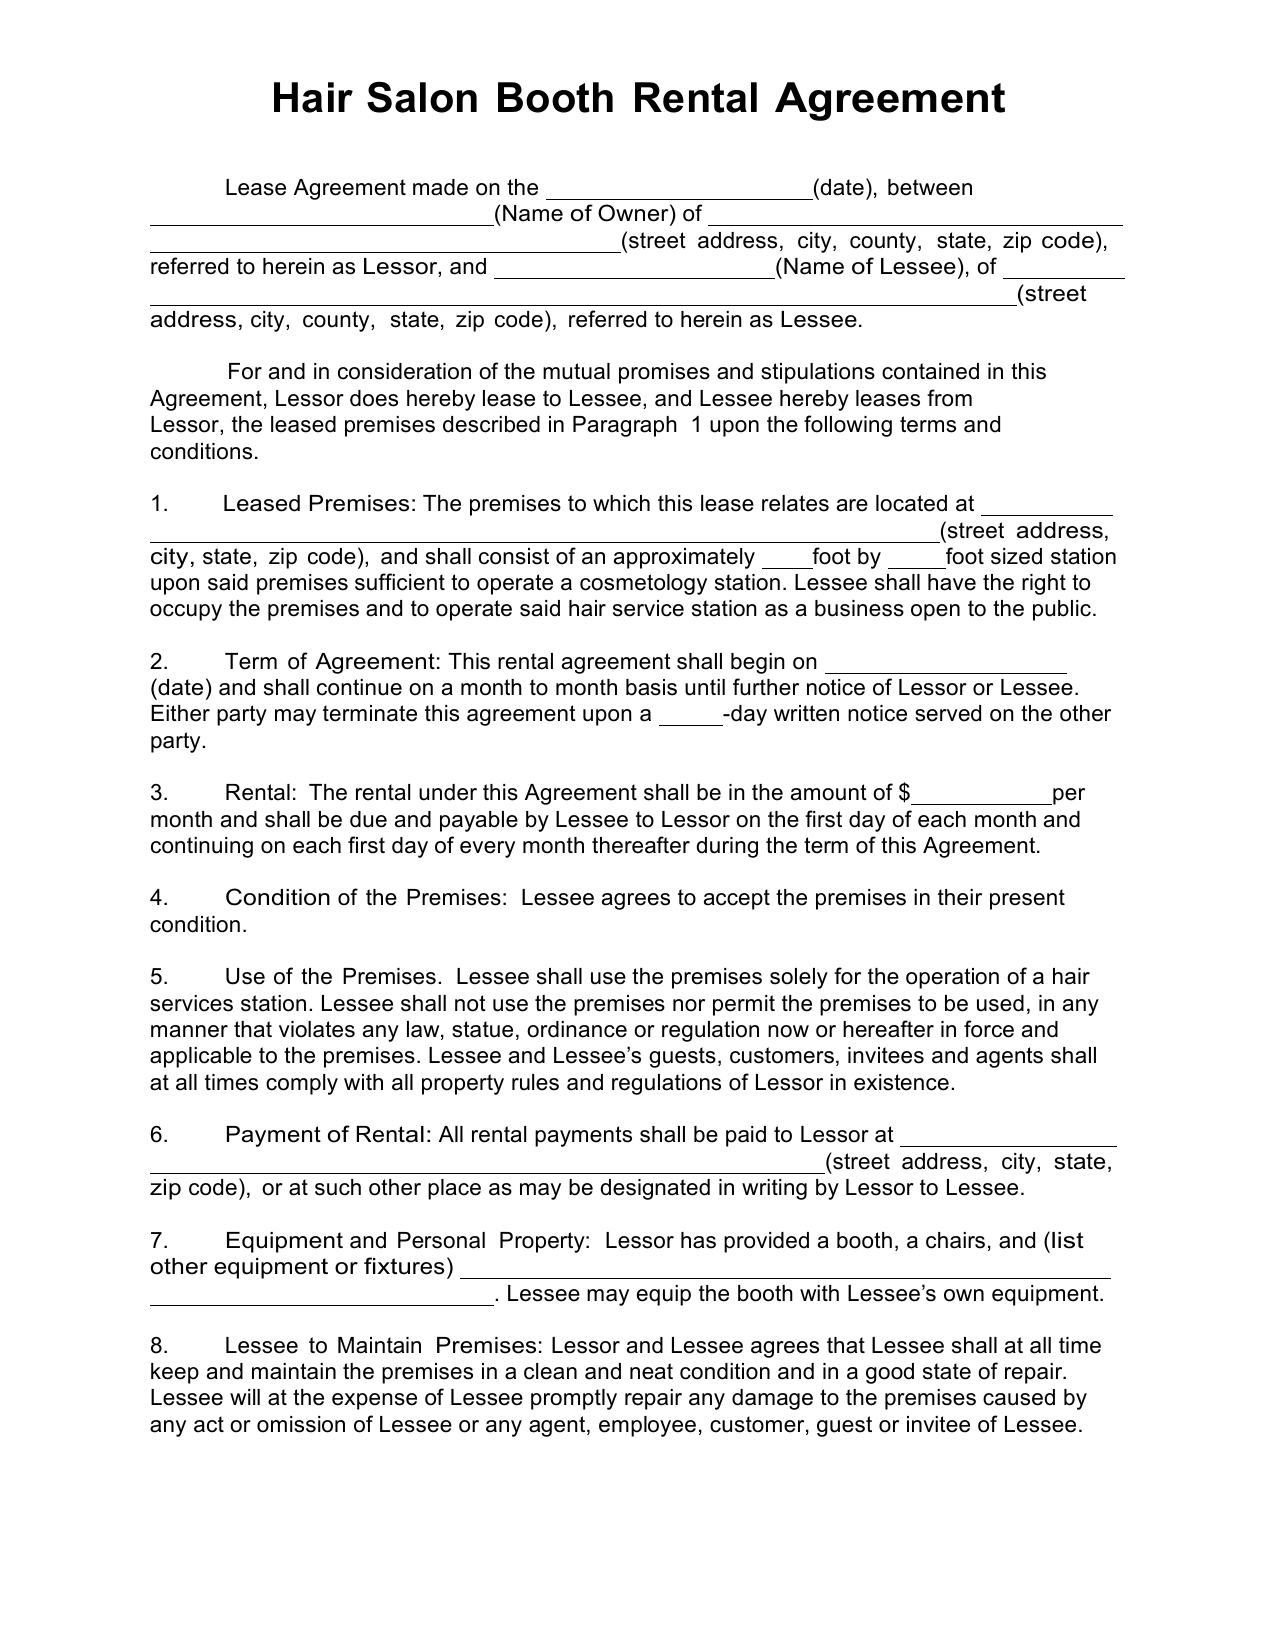 Private Rental Agreement Wa Download Salon Booth Rental Lease Agreement Template Pdf Rtf